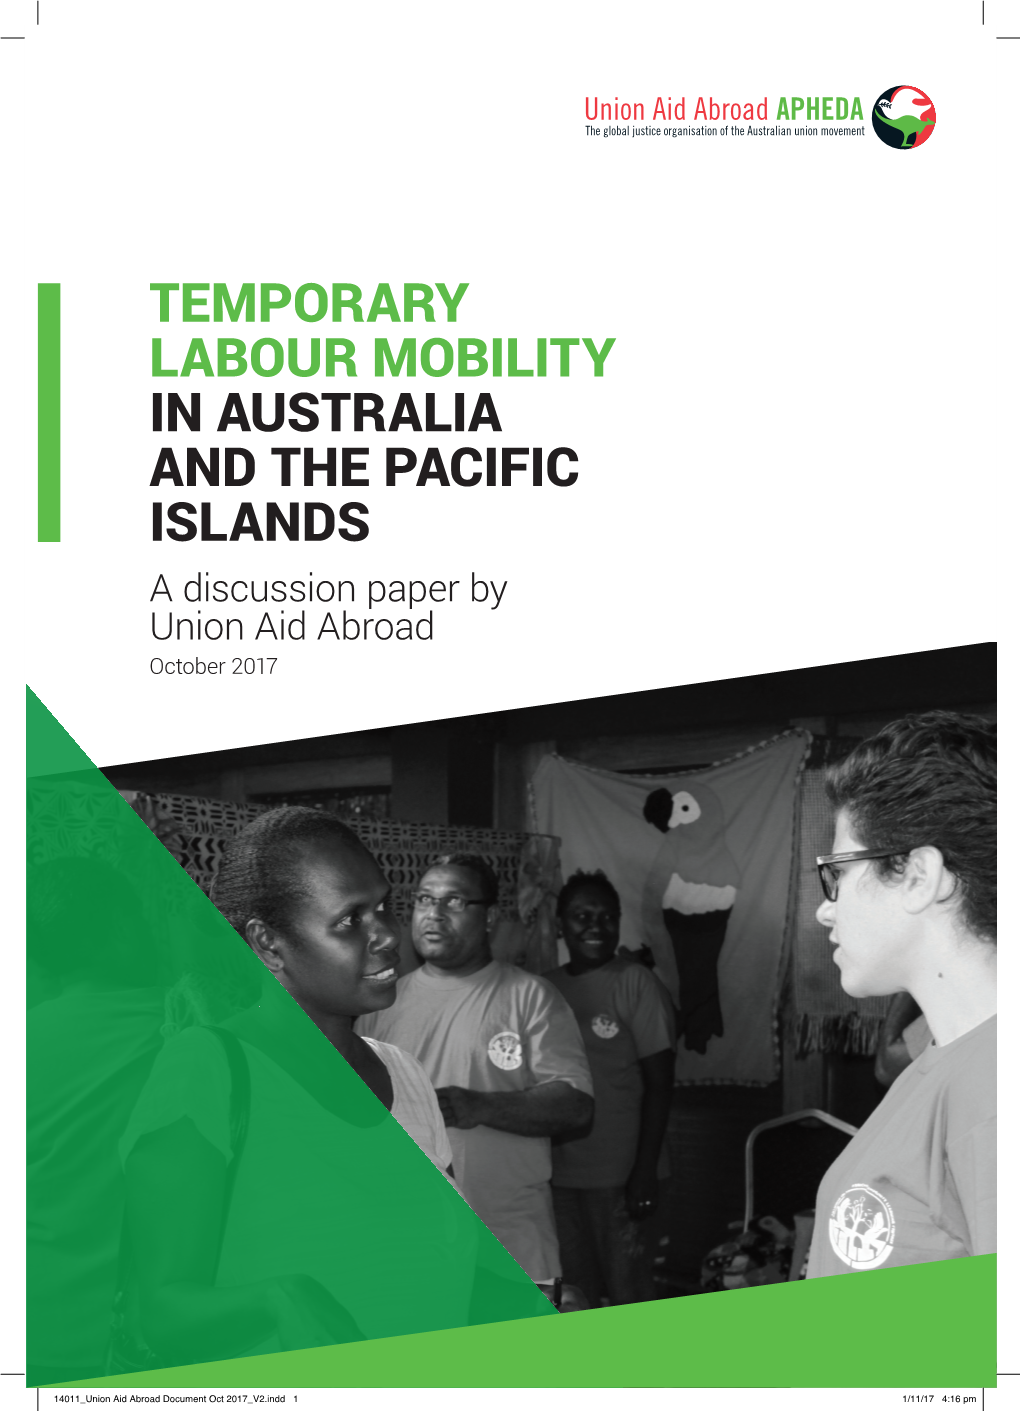 Temporary Labour Mobility in Australia and the Pacific Islands a Discussion Paper by Union Aid Abroad October 2017